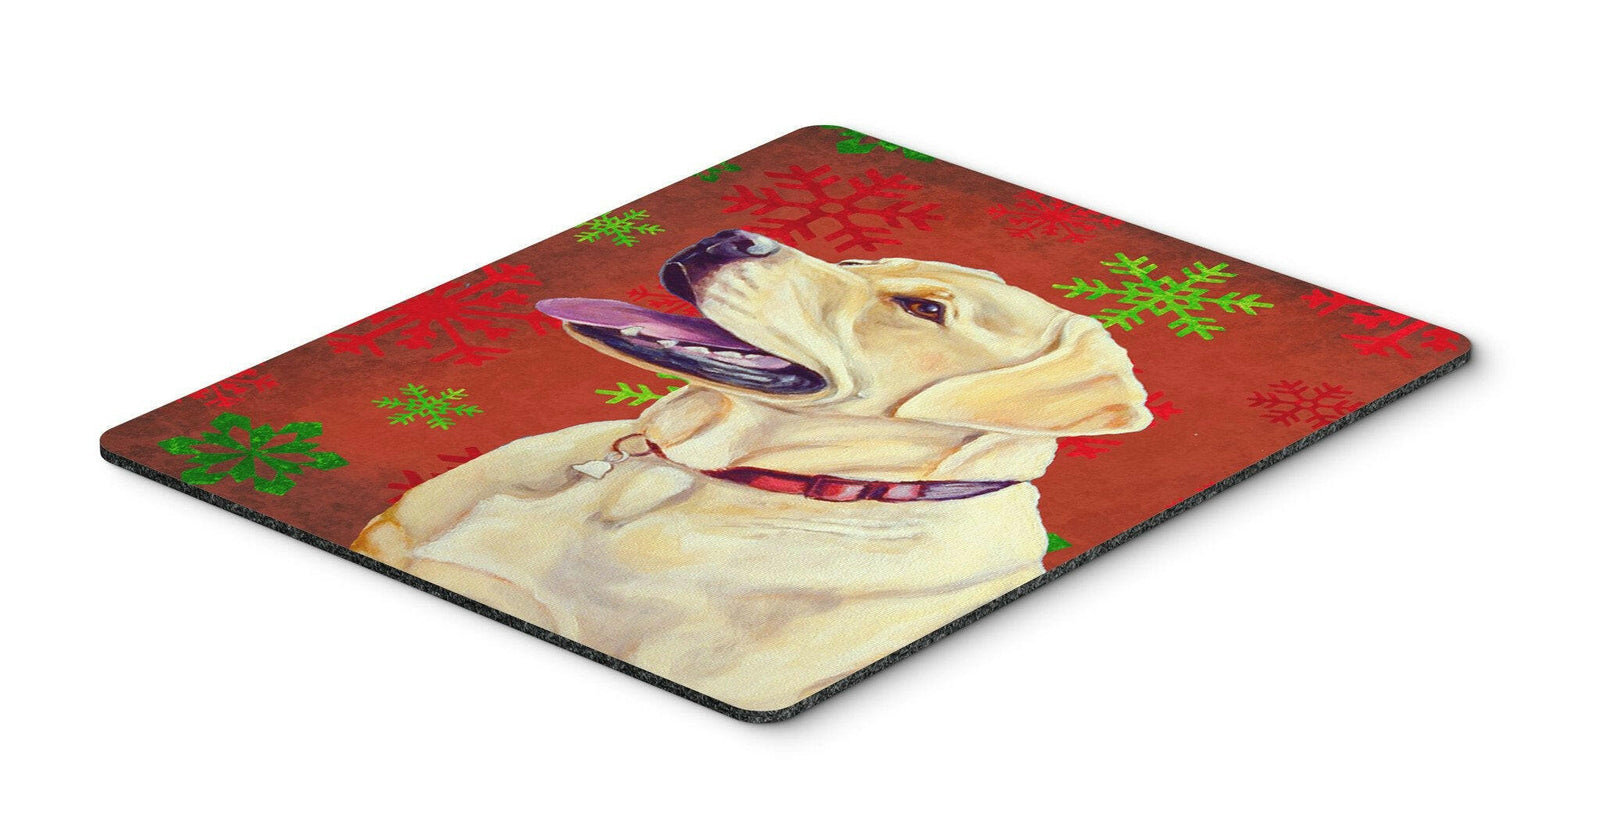 Labrador Red and Green Snowflakes Christmas Mouse Pad, Hot Pad or Trivet by Caroline's Treasures